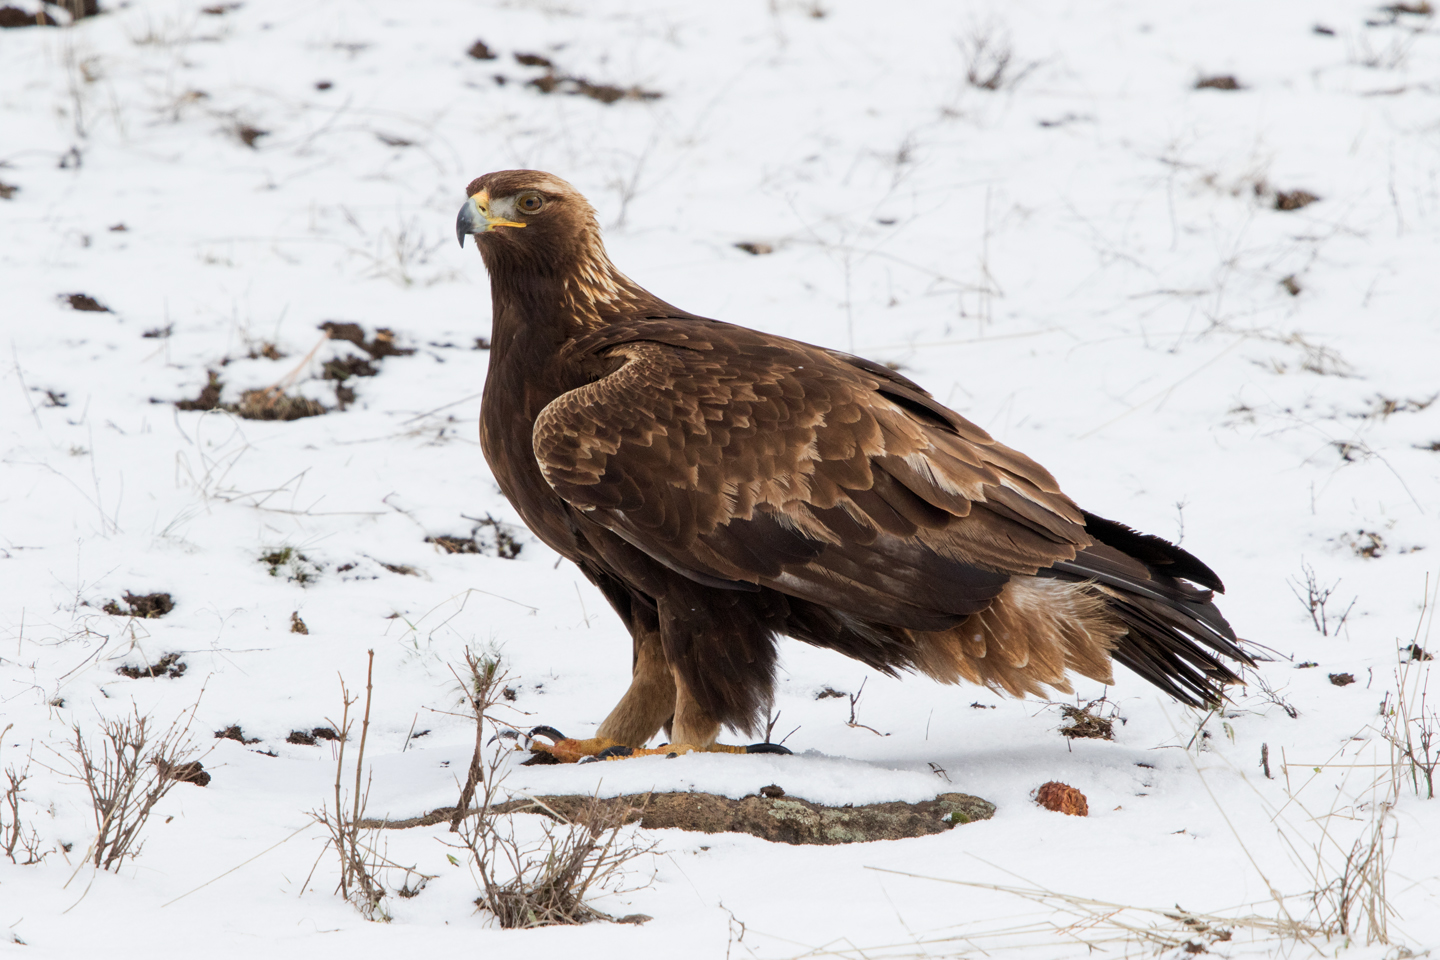 It is unusual for a golden eagle to tolerate a photographer so nearby.